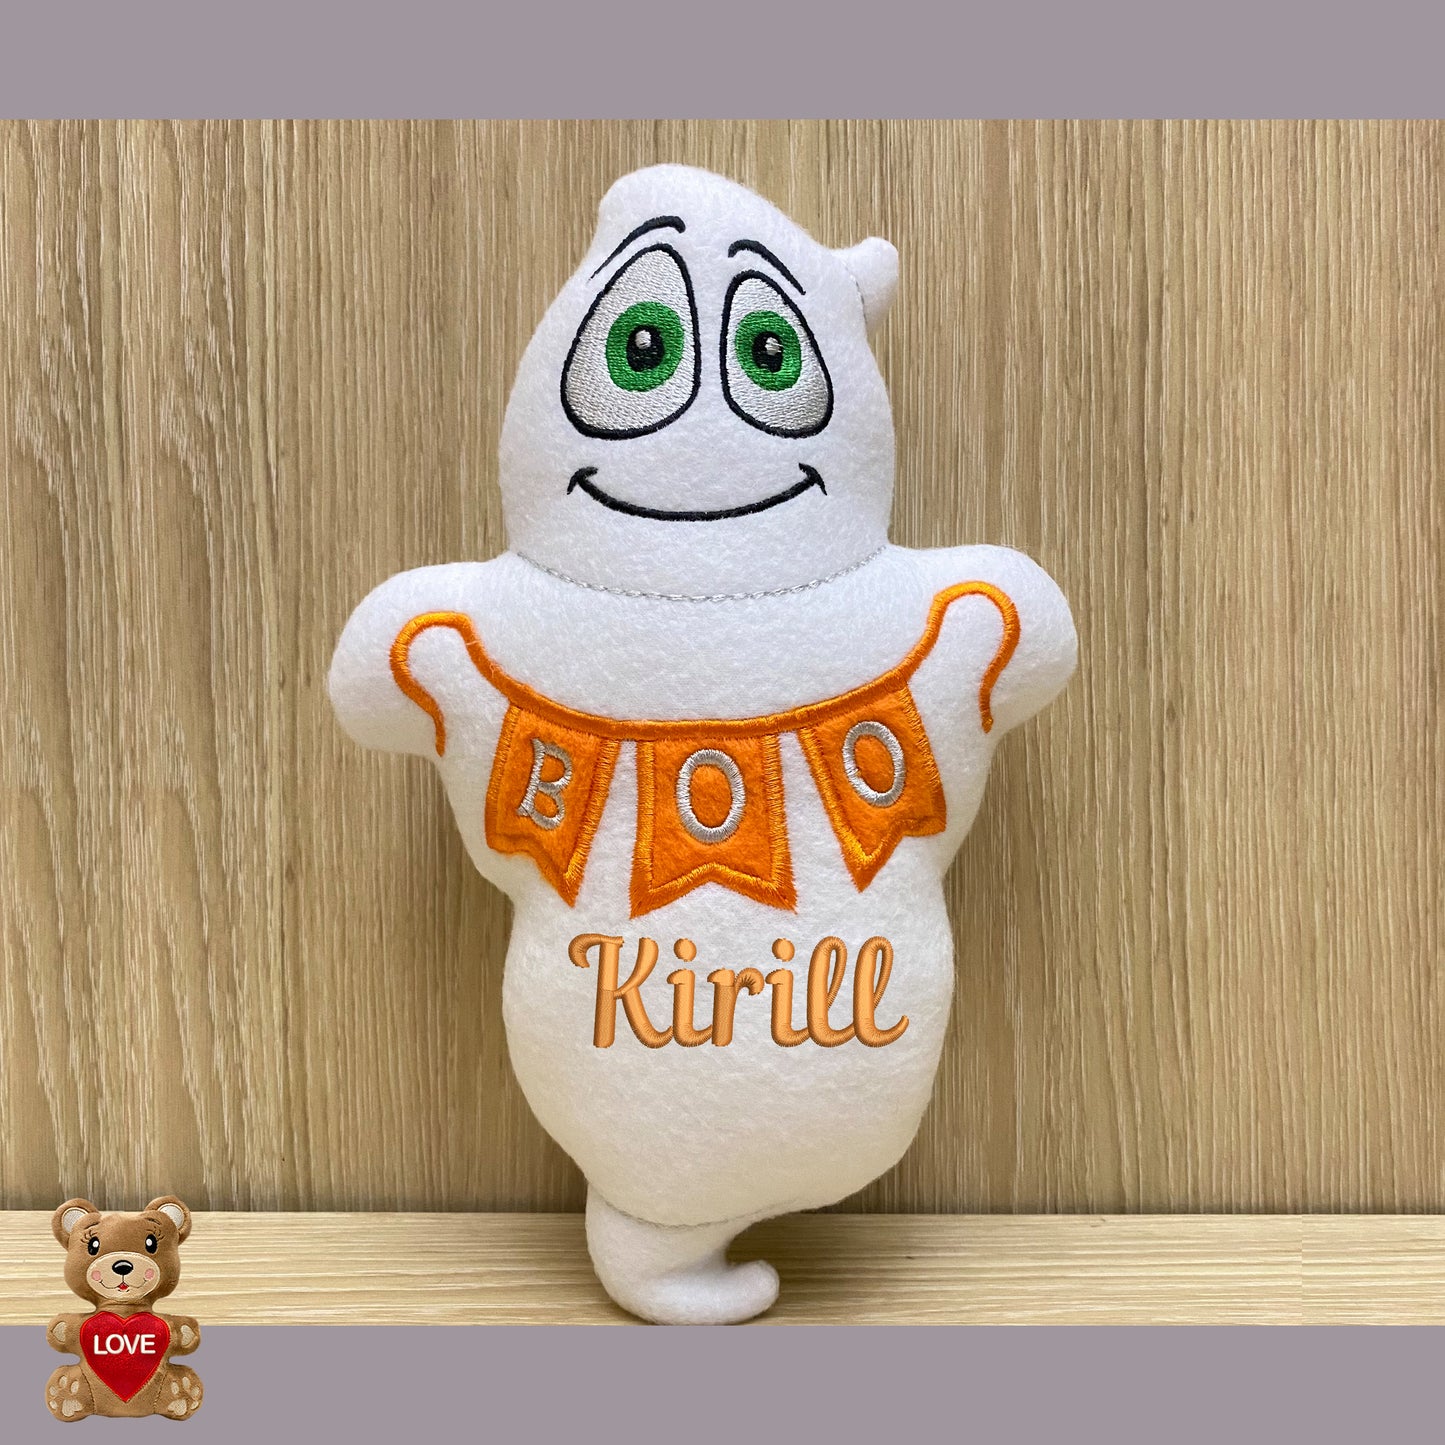 Personalised embroidery Plush Soft Toy Ghost ,Super cute personalised soft plush toy, Personalised Gift, Unique Personalized Birthday Gifts , Custom Gifts For Children